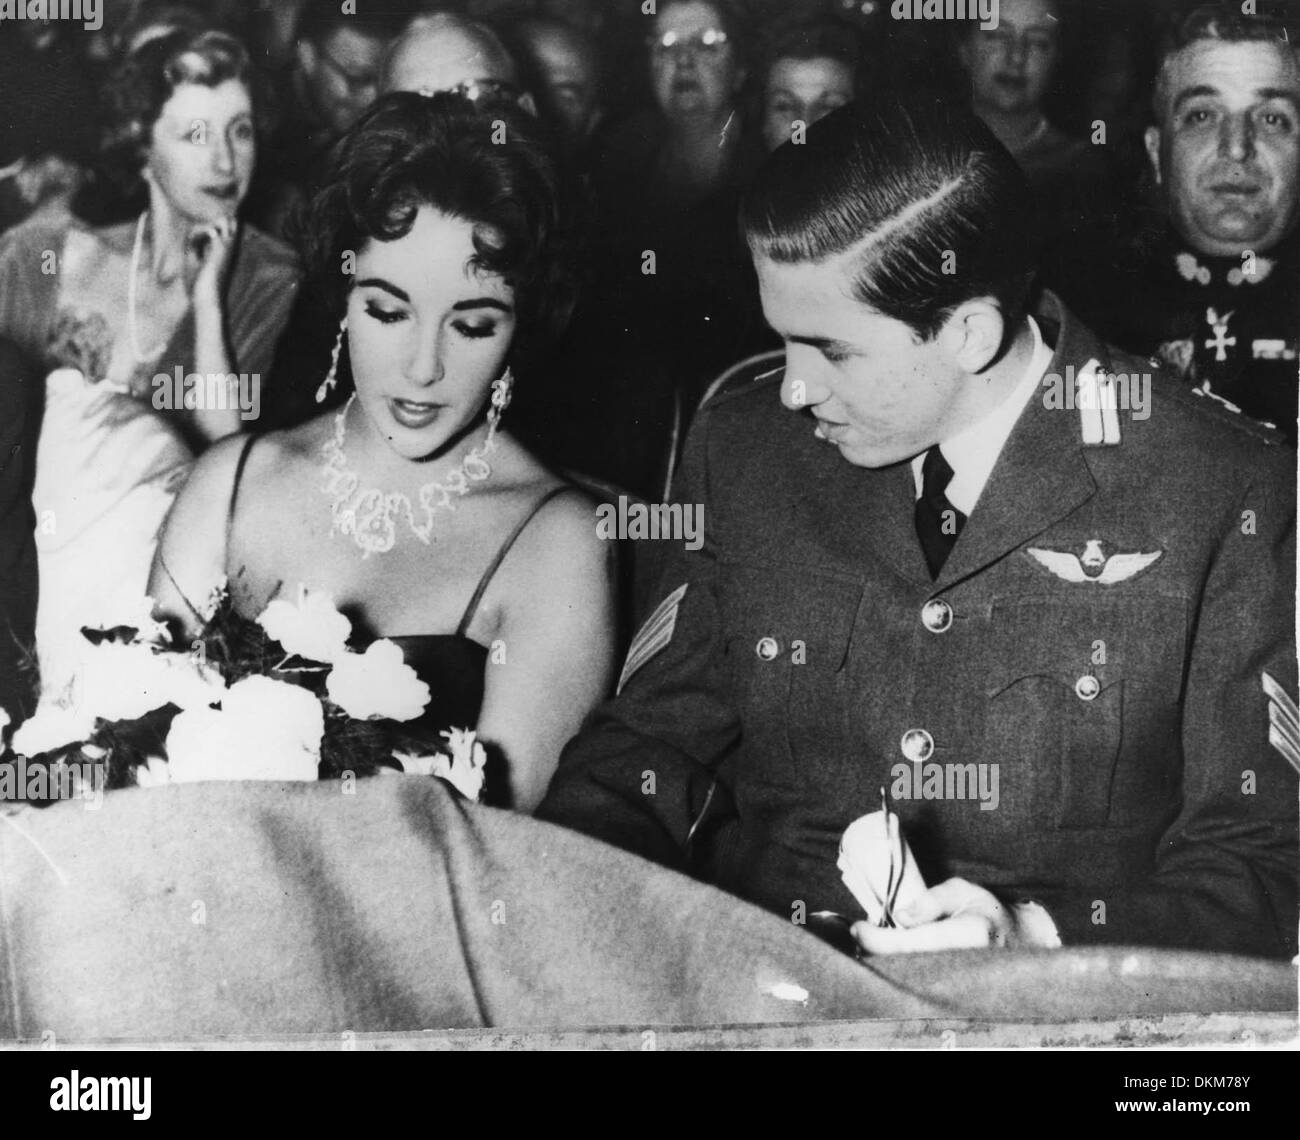 Feb. 5, 1958 - Athens, Greece - Academy Award winning actress ELIZABETH 'LIZ' TAYLOR is in Athens with husband Mike Todd for the 'Round the World in 80 Days' premiere. PICTURED: Liz Taylor chats with PRINCE CONSTANTINE II of Greece at the Radio City Theatre. (Credit Image: © KEYSTONE Pictures USA) Stock Photo